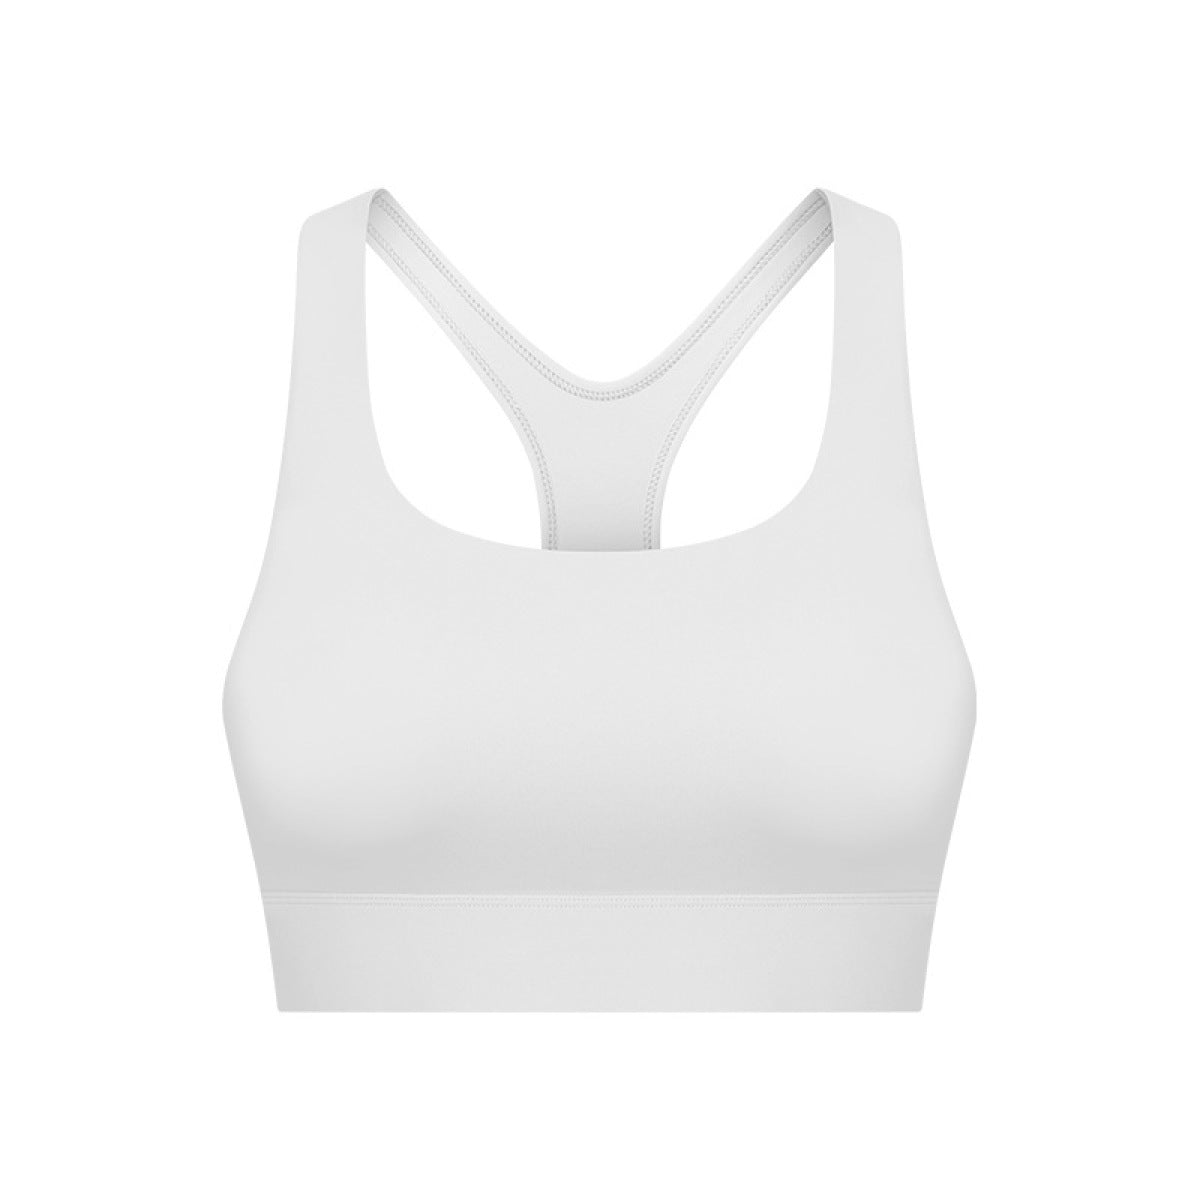 High-Strength Shock-Proof Cut Out Sports Bras With 3-Hook